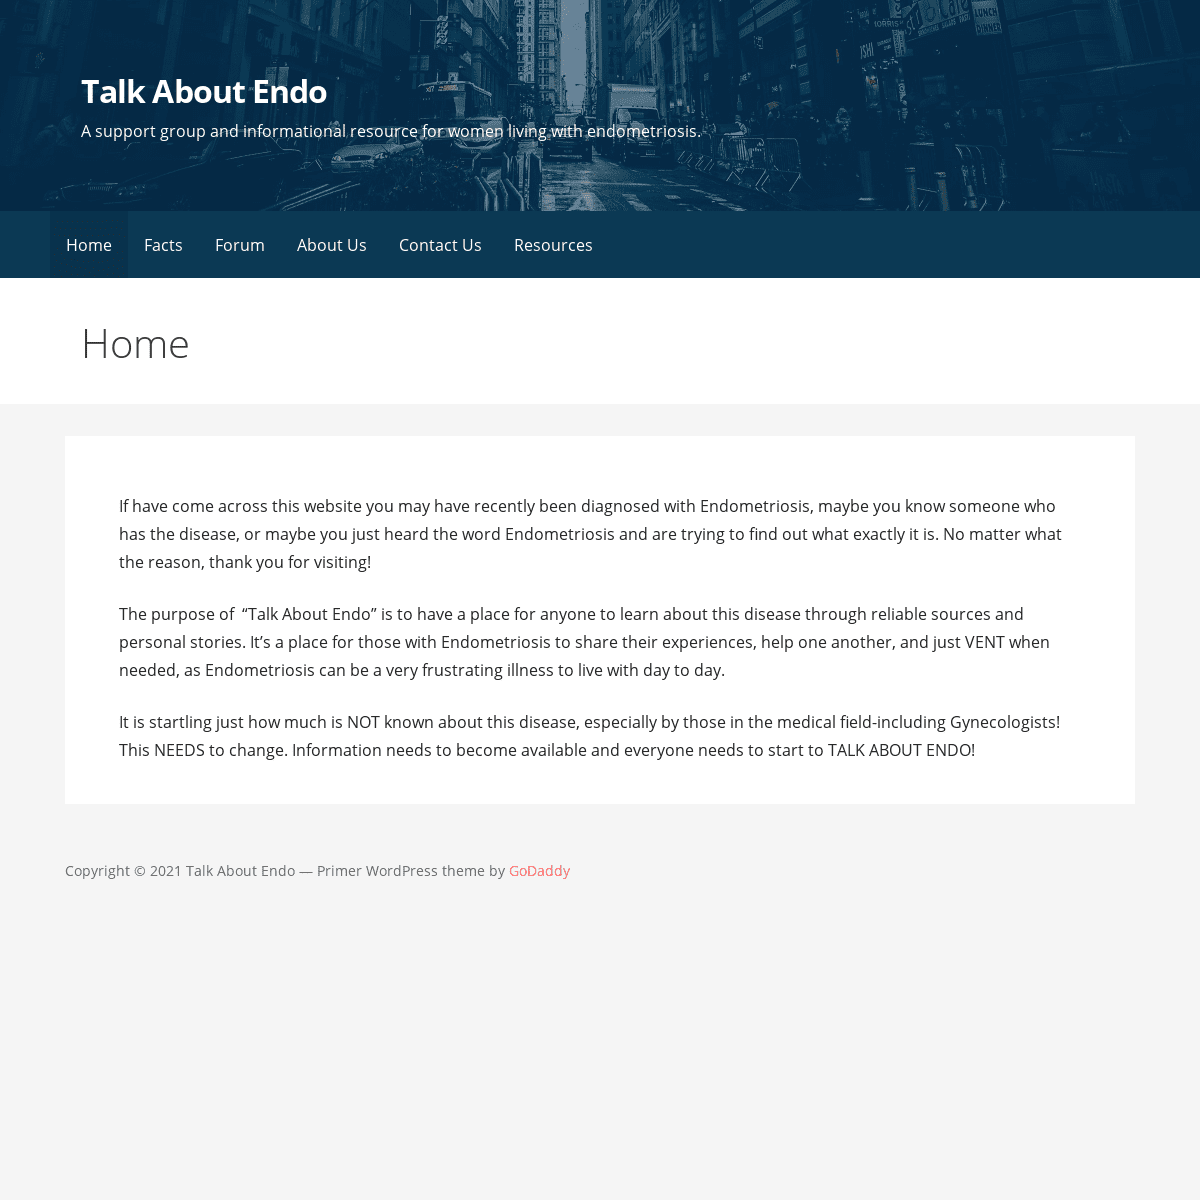 A complete backup of https://talkaboutendo.com